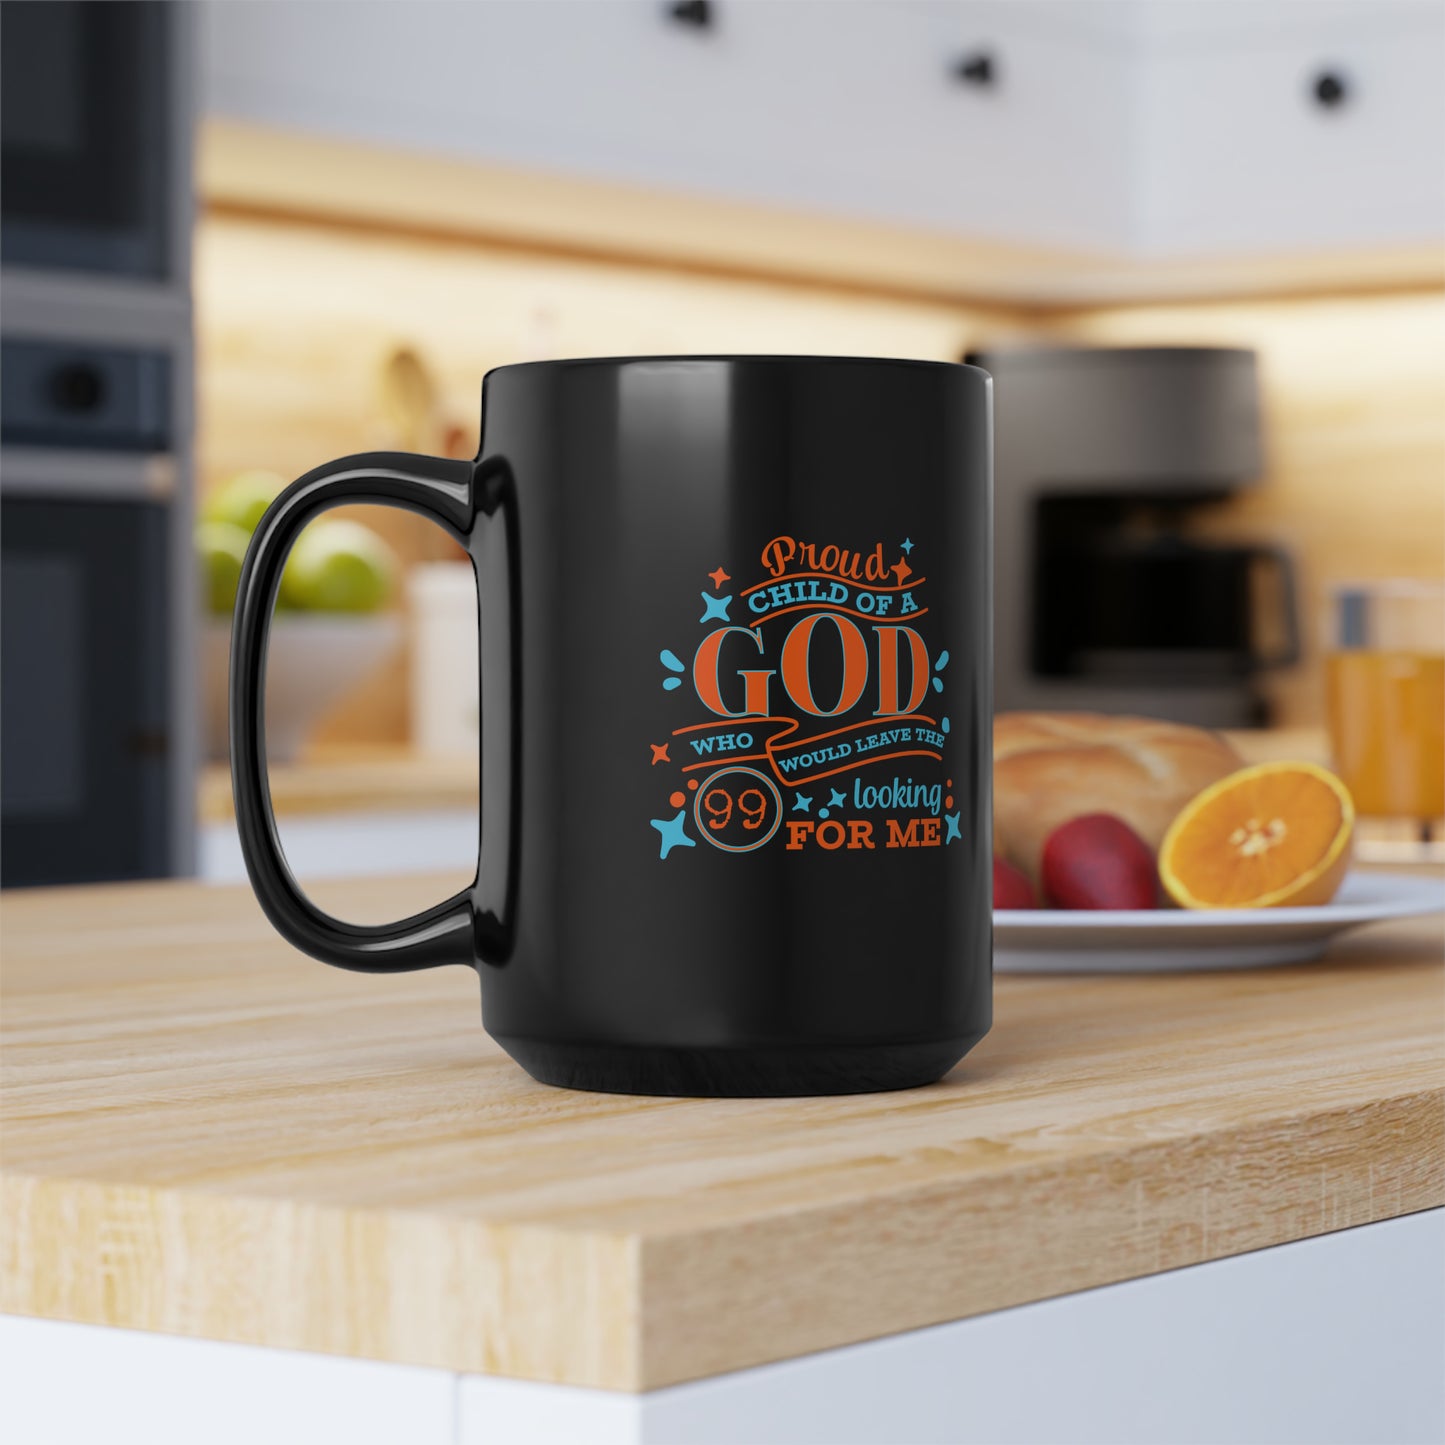 Proud Child Of A God Who Would Leave The 99 Looking For Me Black Ceramic Mug, 15oz (double sided printing) Printify